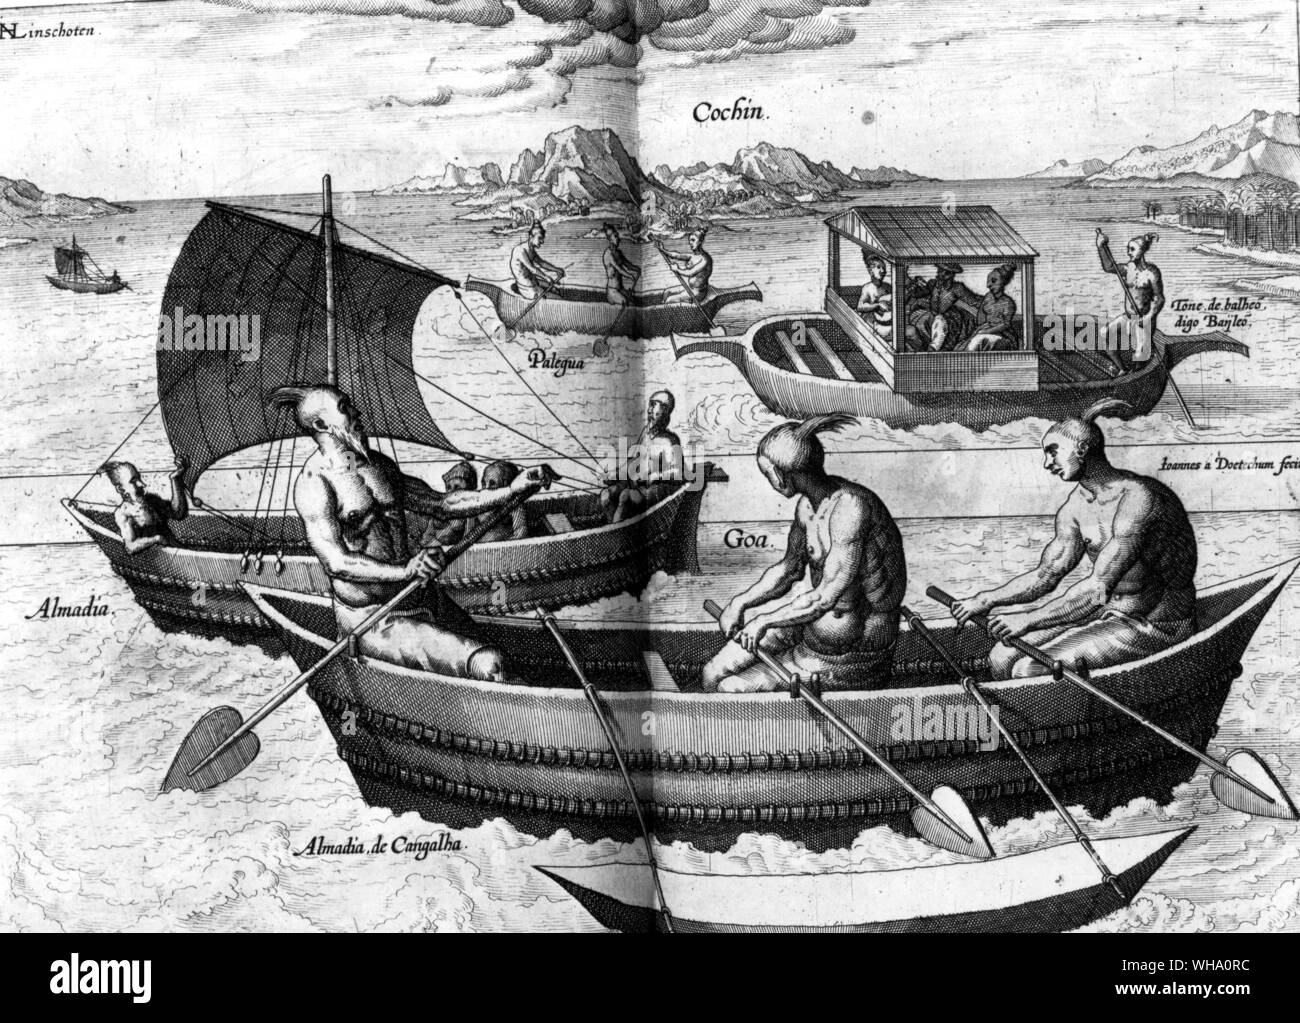 In Goa and Cochin the Portuguese established a trading system using native craft: two types of vessel are illustrated and named Stock Photo